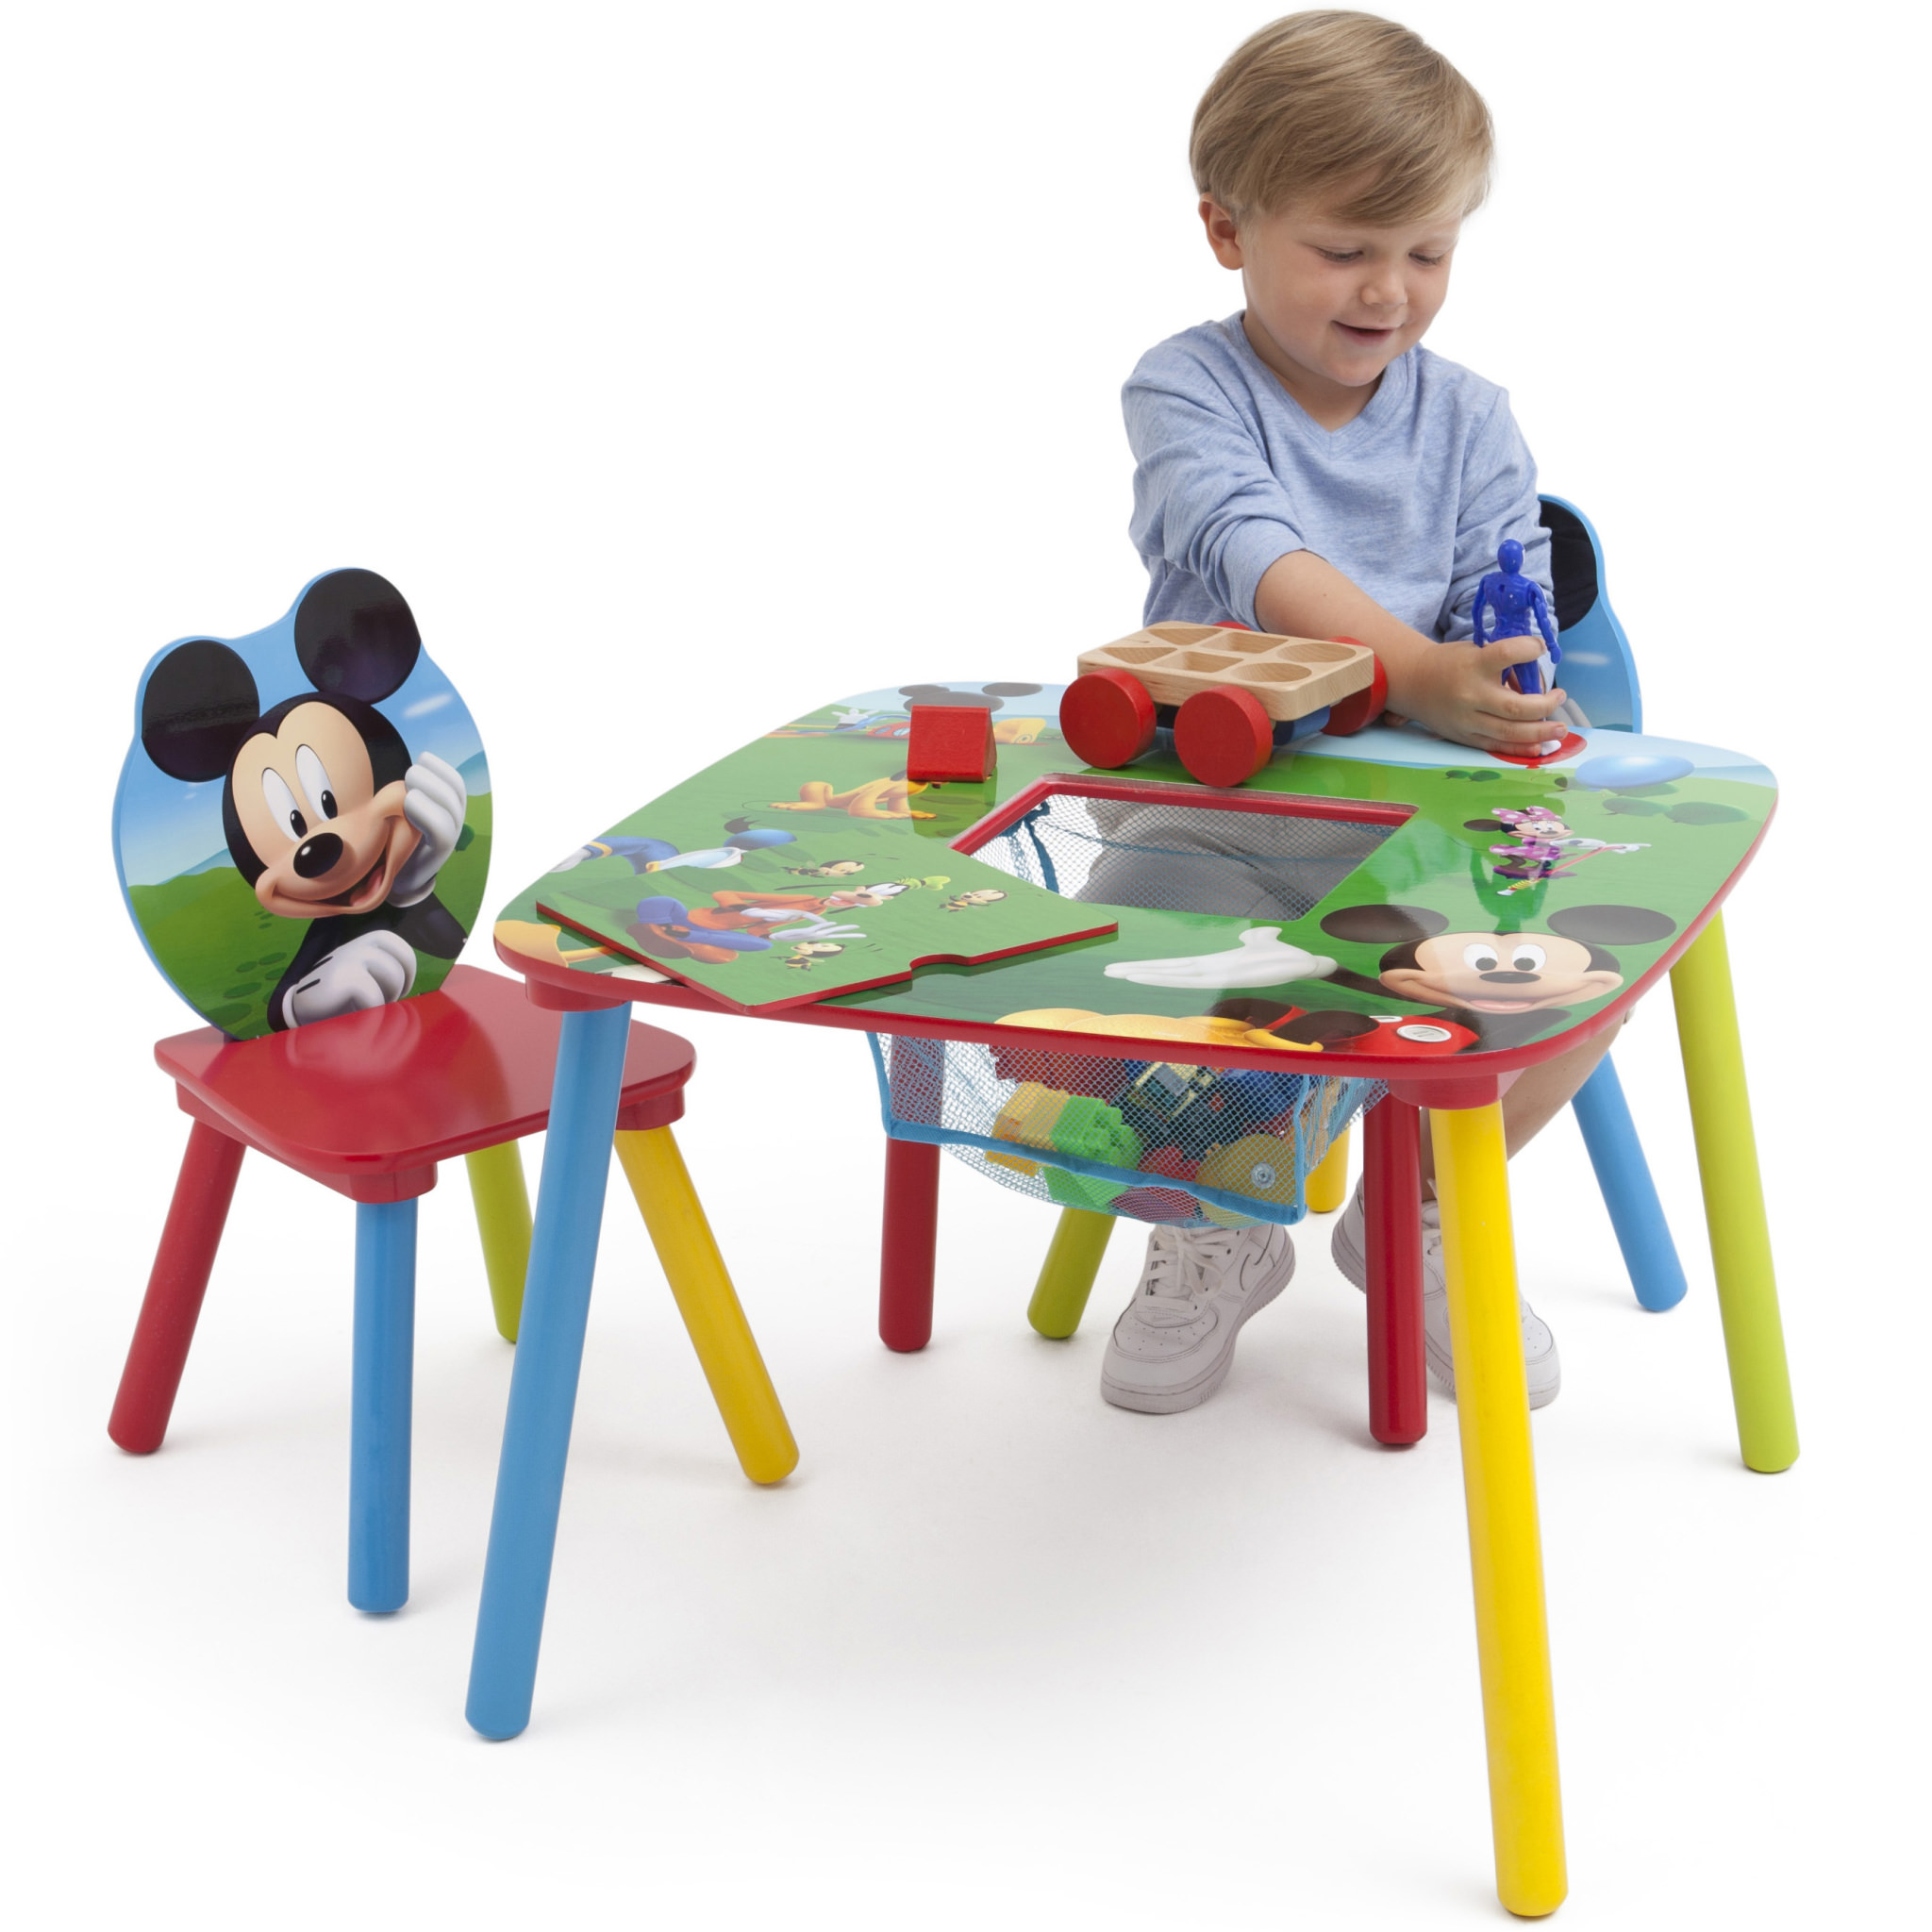 Disney Mickey Mouse Wood Kids Storage Table and Chairs Set by Delta Children - image 5 of 5